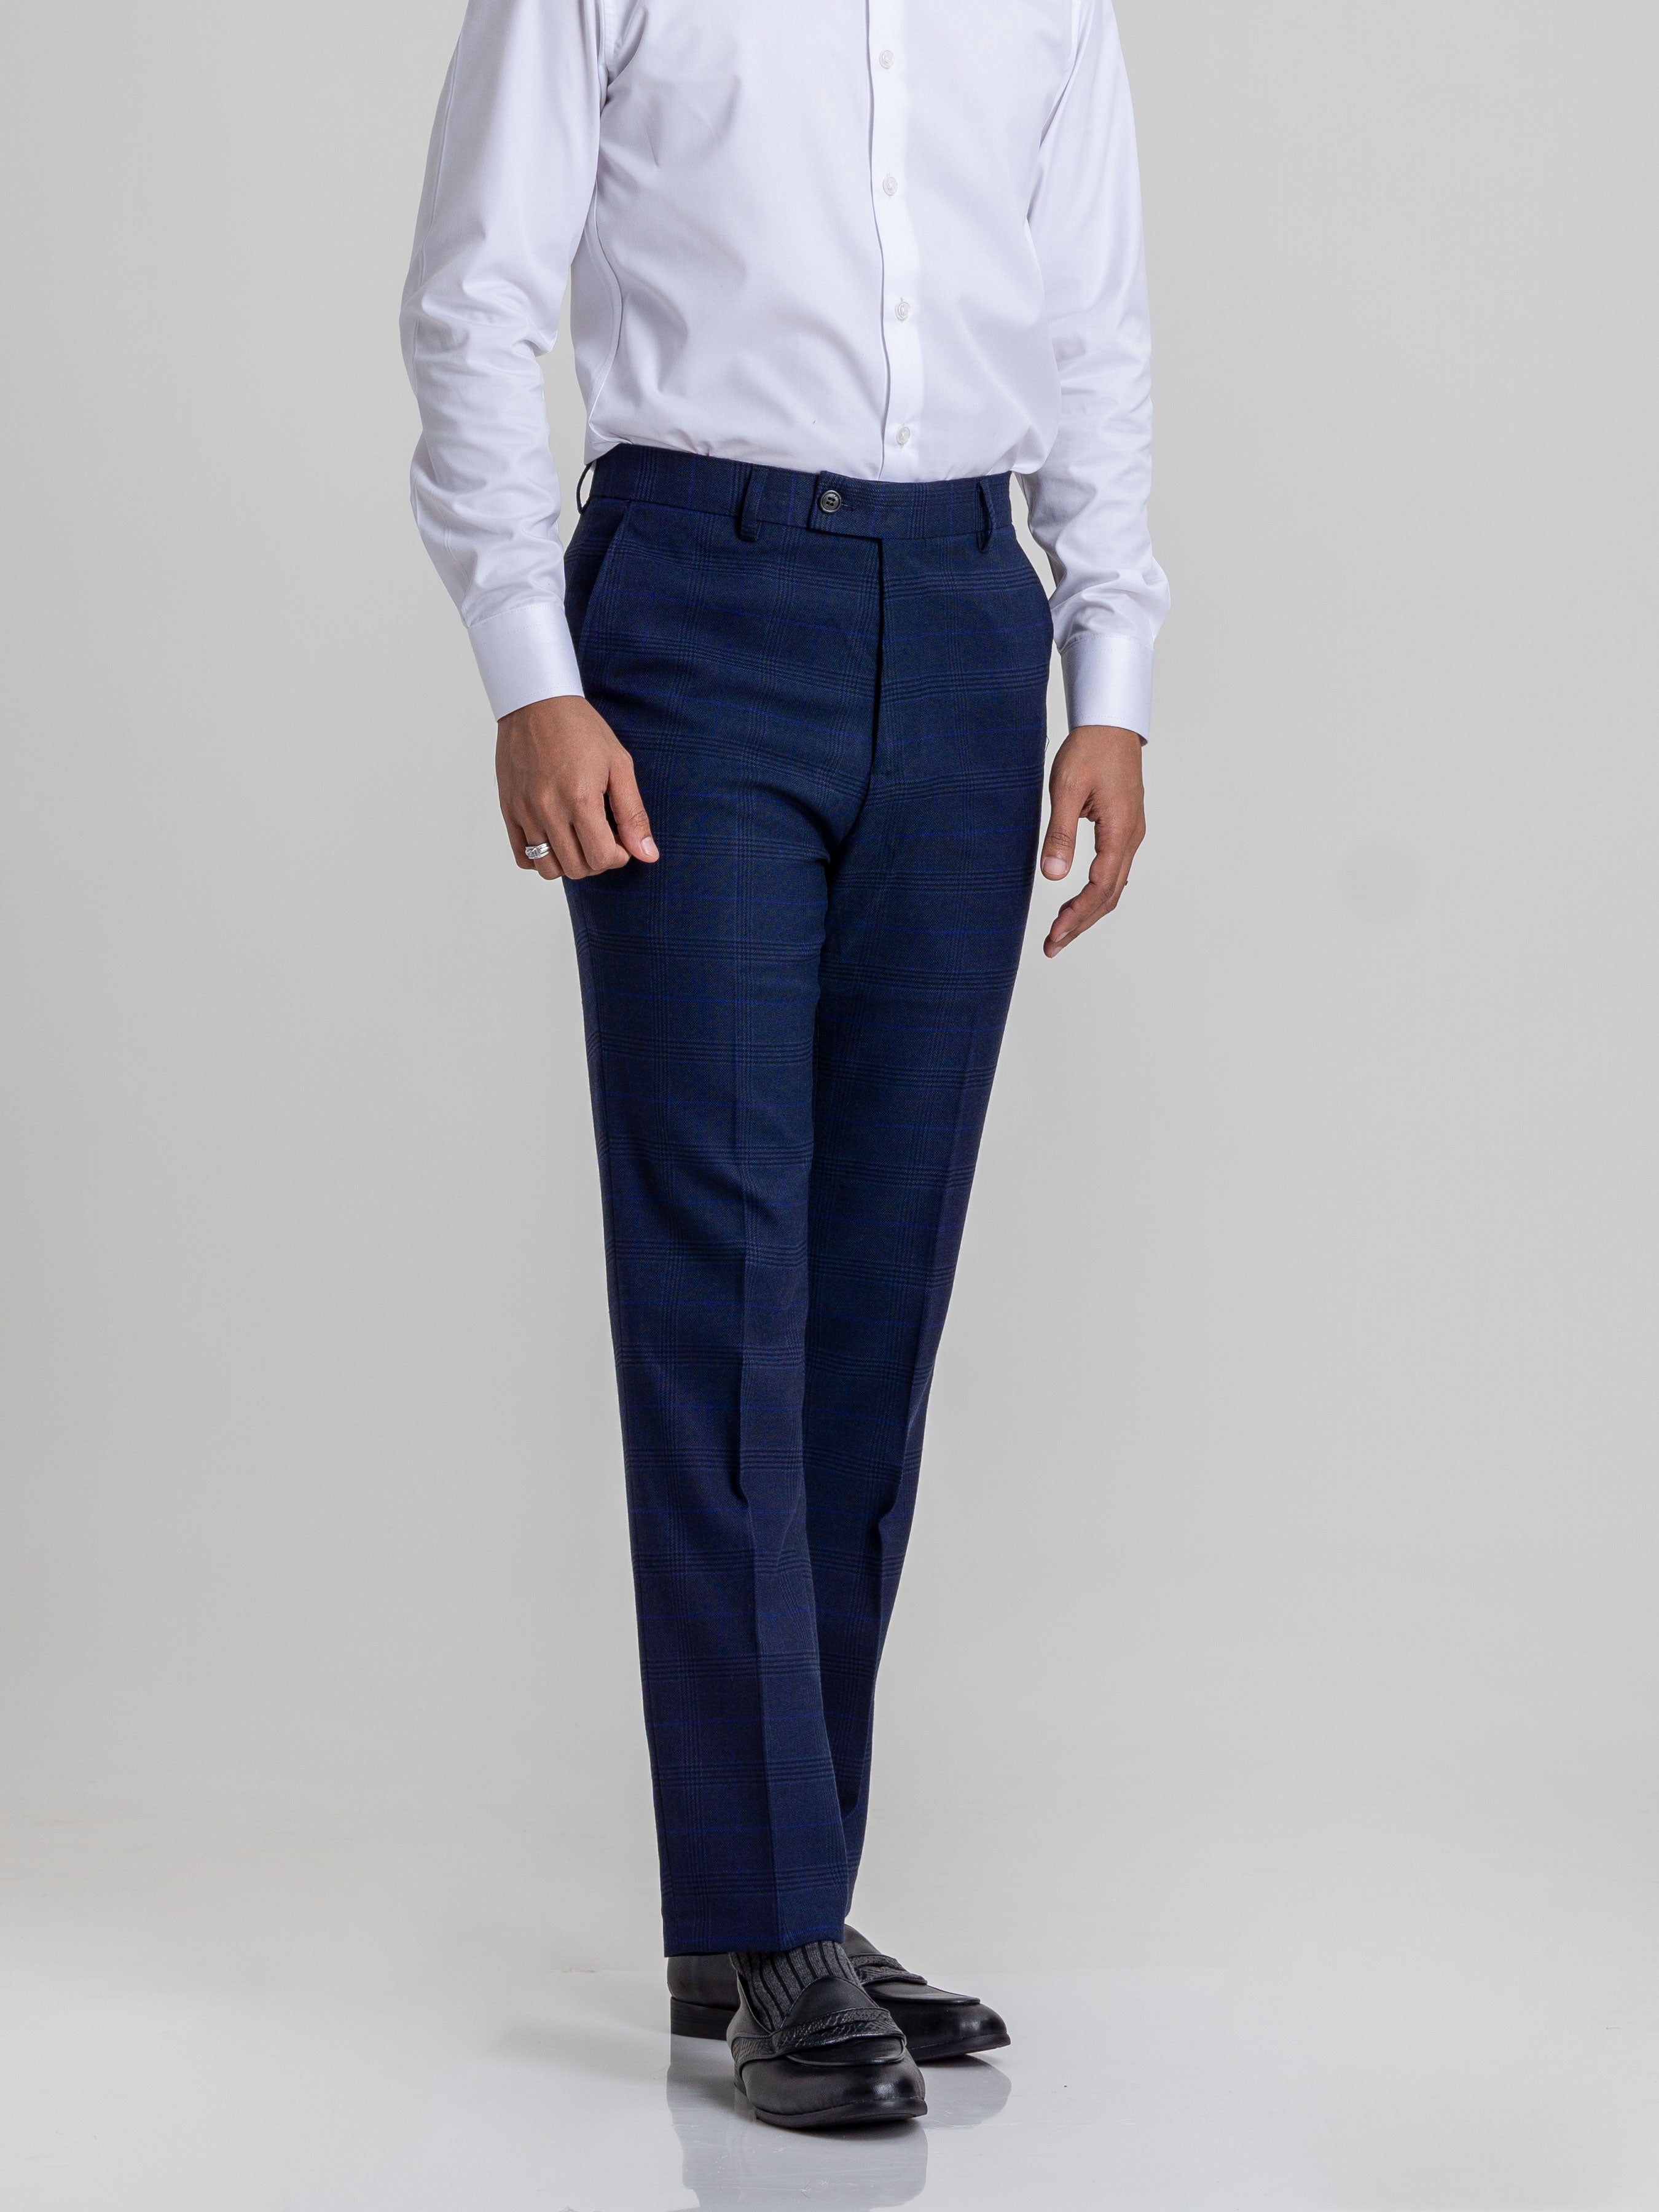 Trousers With Belt Loop -  Royal Blue Classic Checkered (Stretchable) - Zeve Shoes